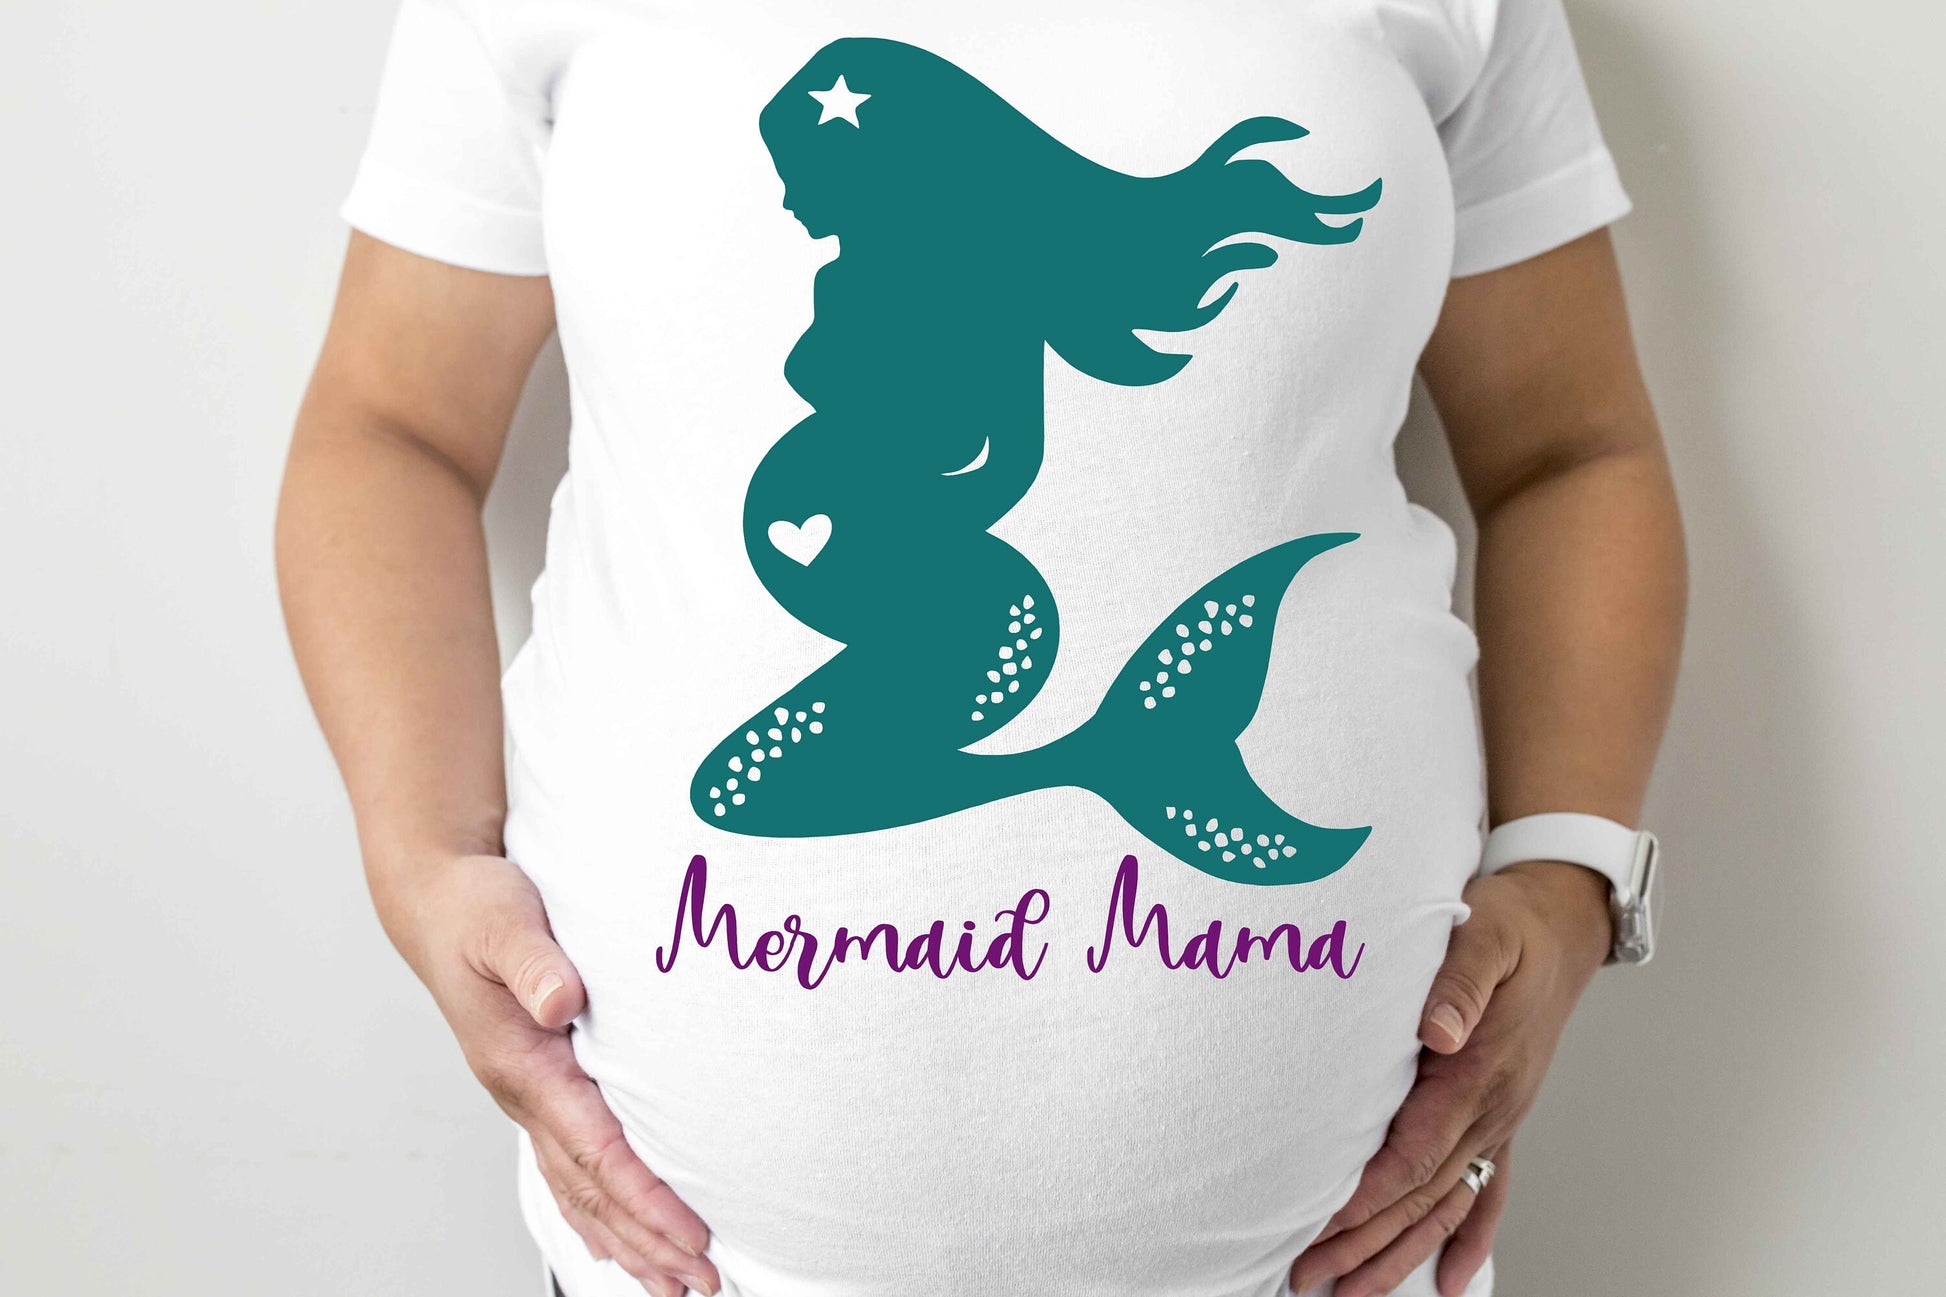 Mermaid Mama Maternity T-Shirt - maternity cut shirt with ruched sides - pregnancy announcement - maternity shirt - mermaid shirt